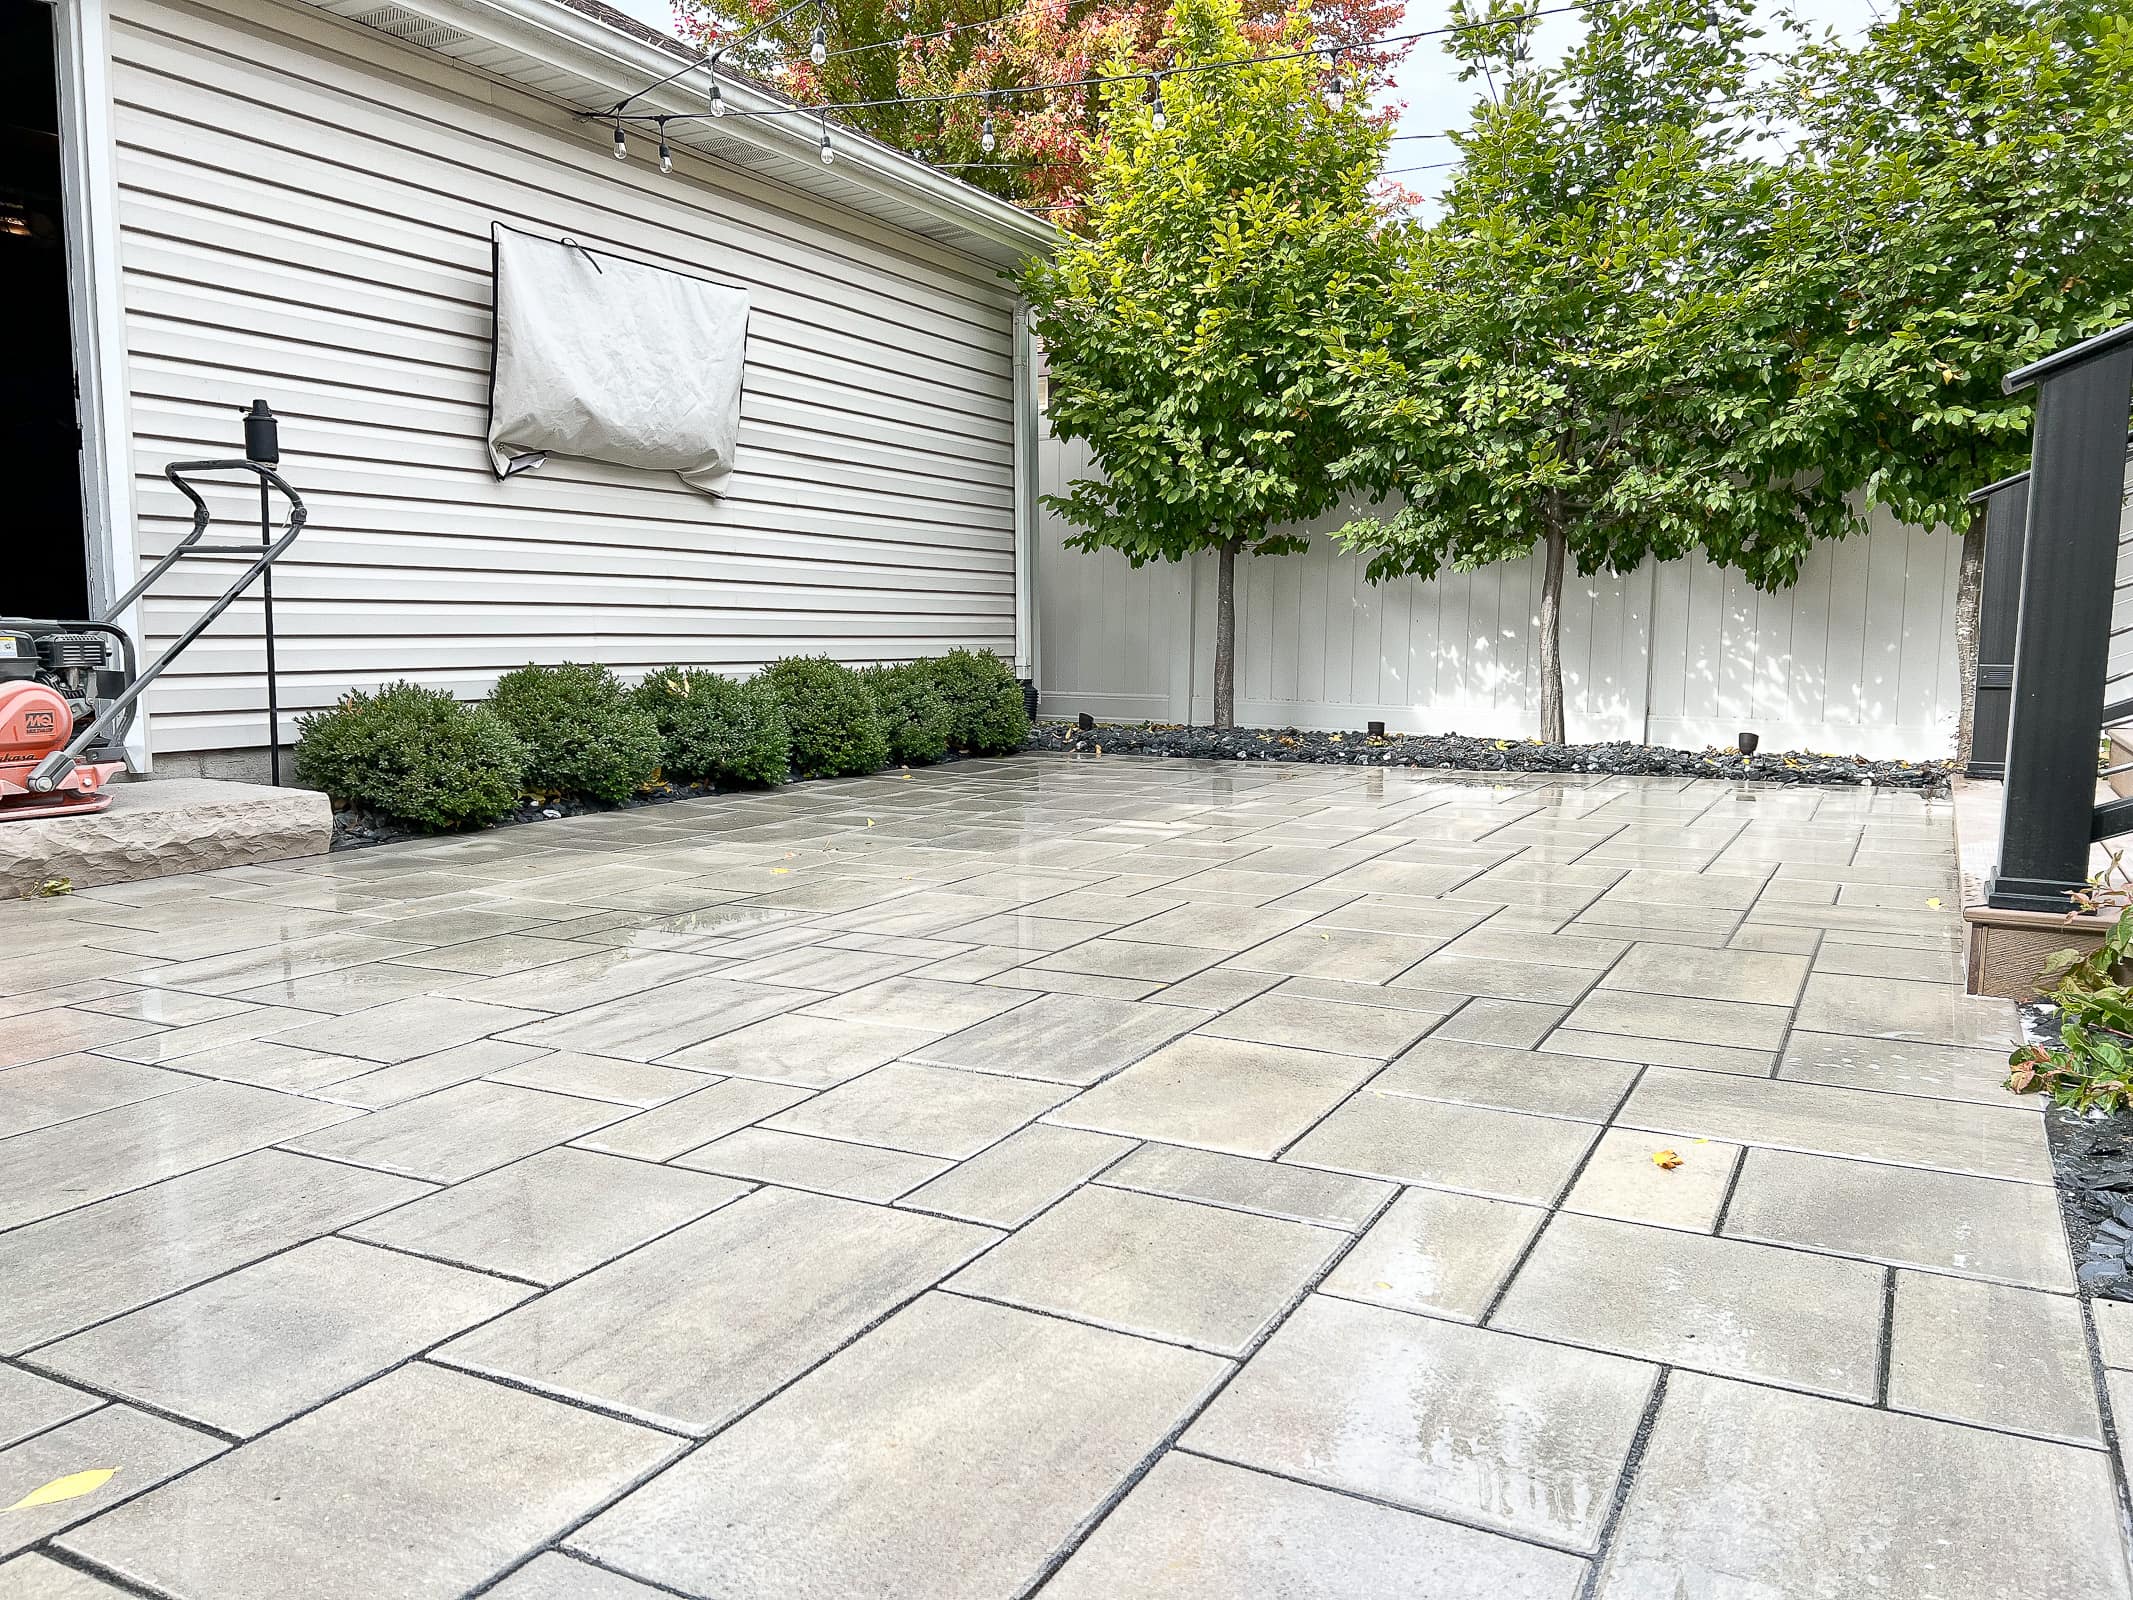 How to install polymeric sand on pavers